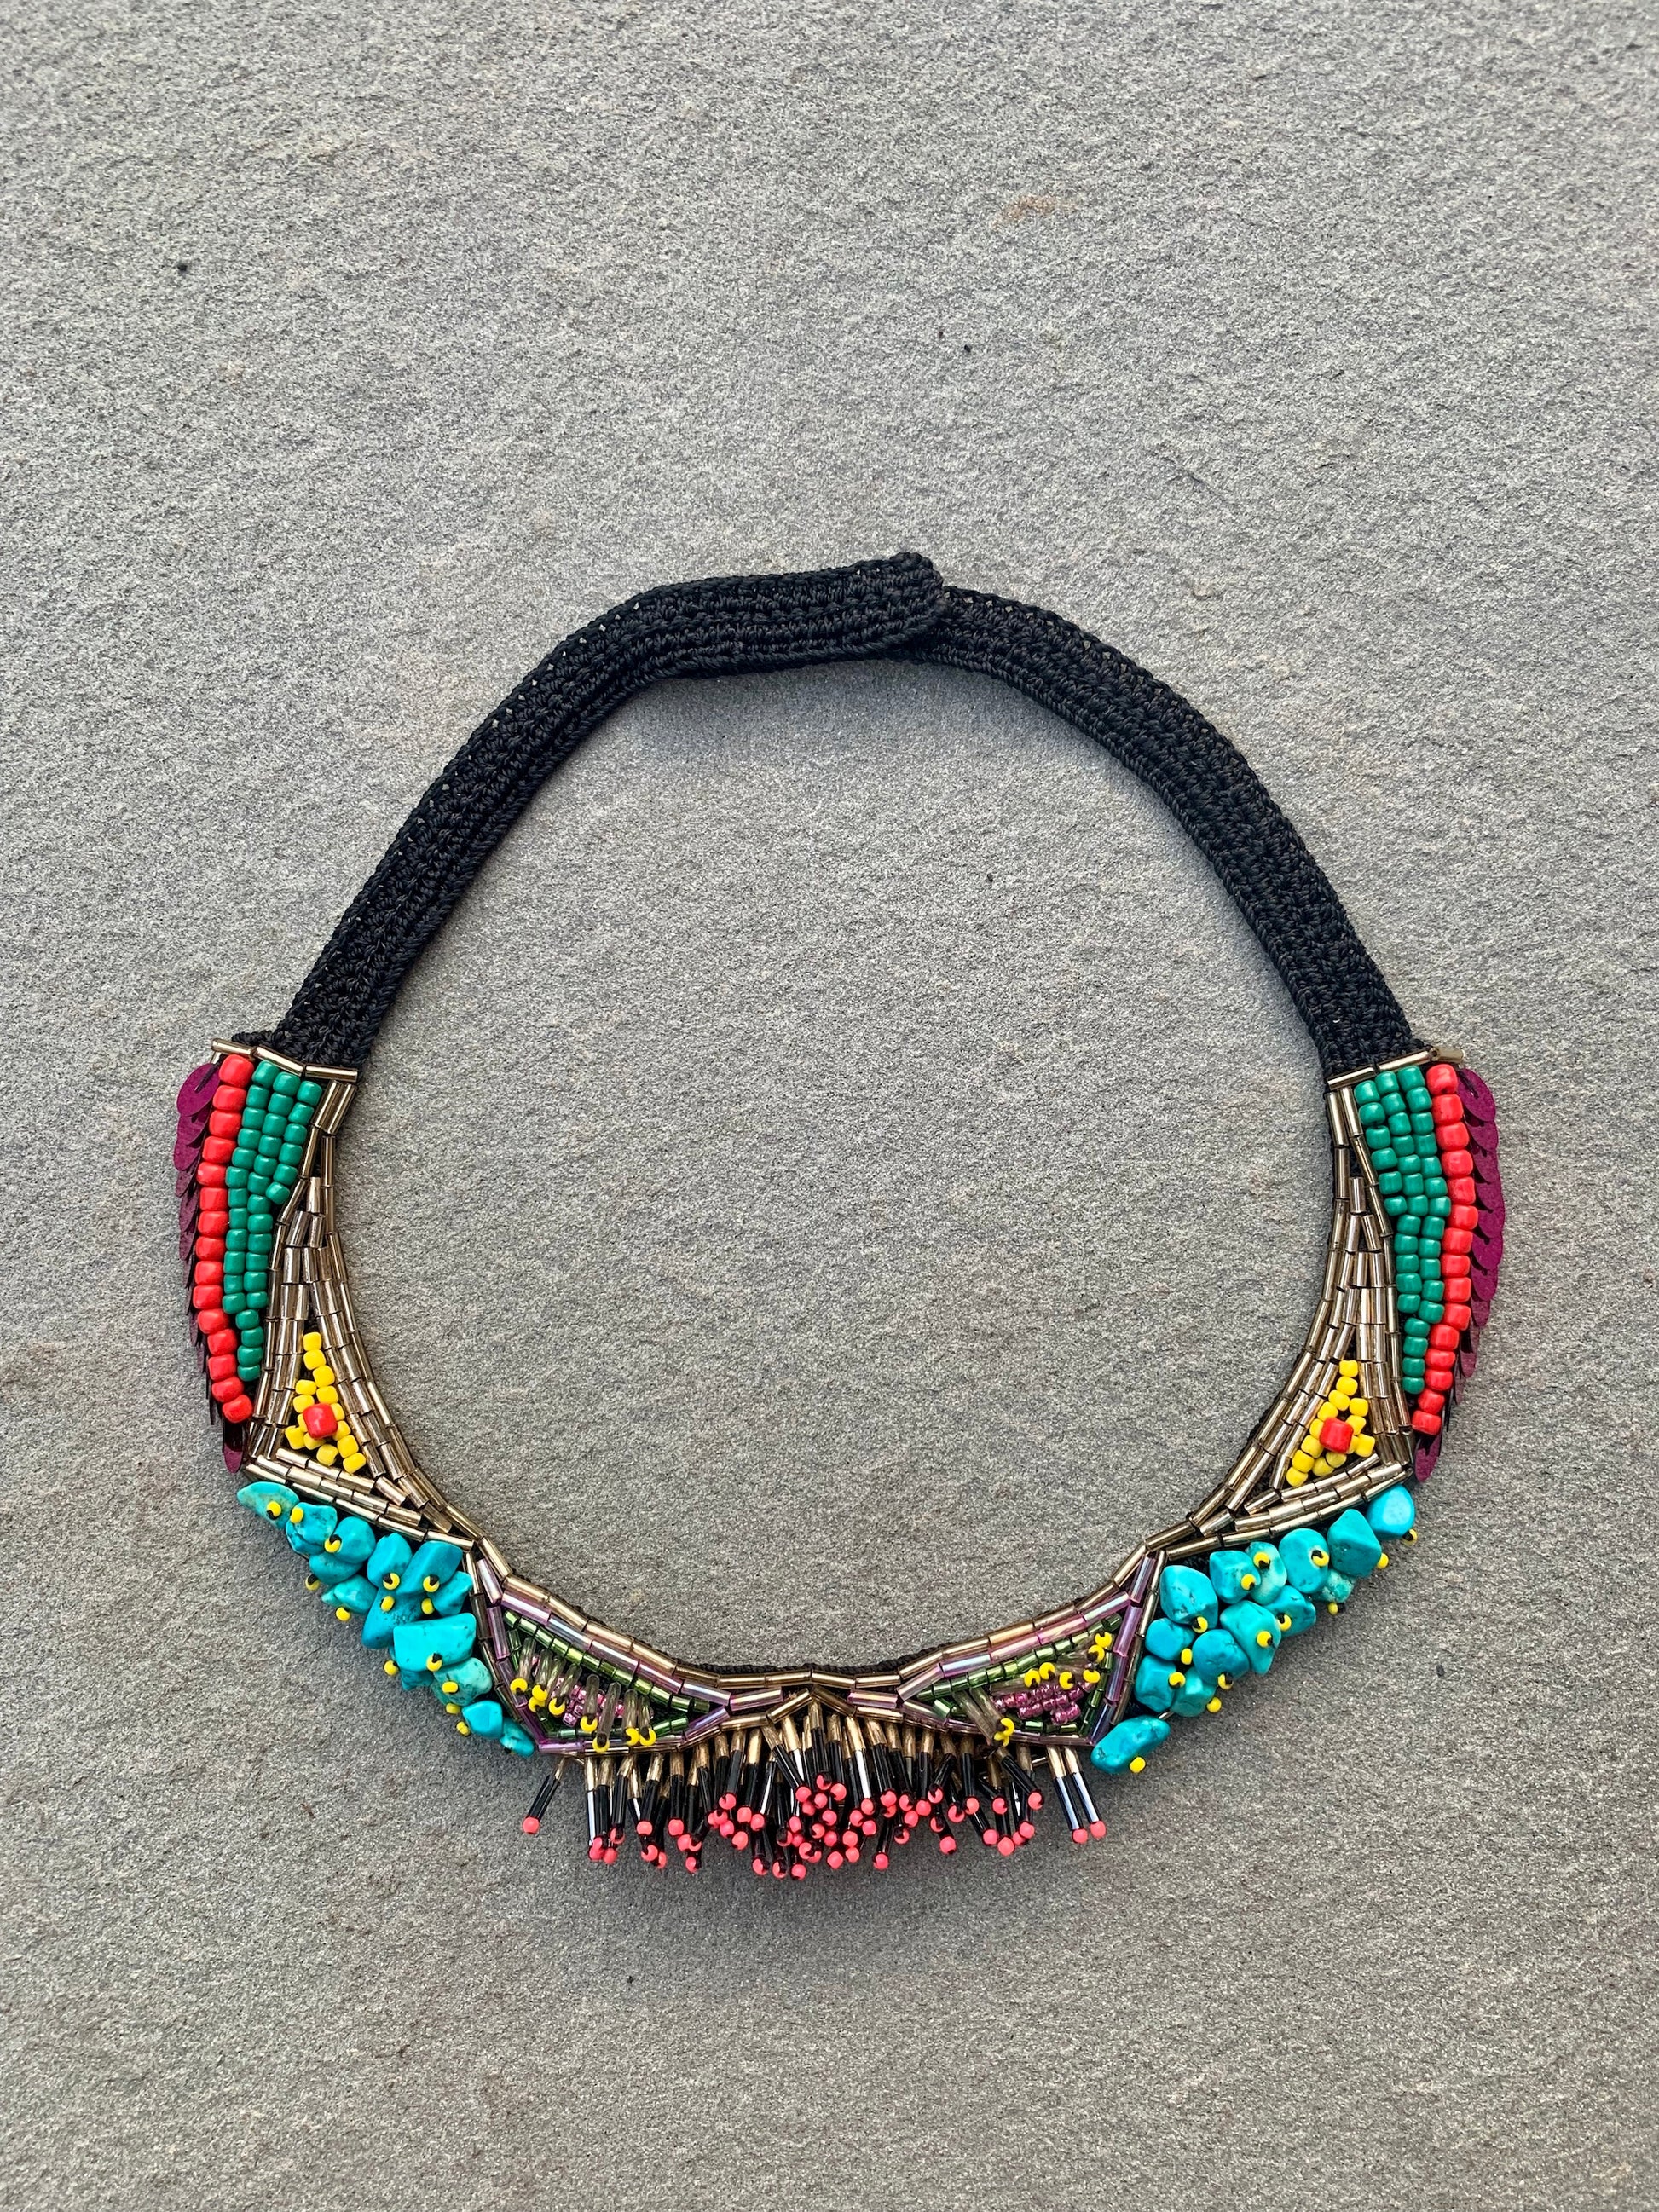 Handmade Bead Embroidery Necklace inspired by Cats of Istanbul